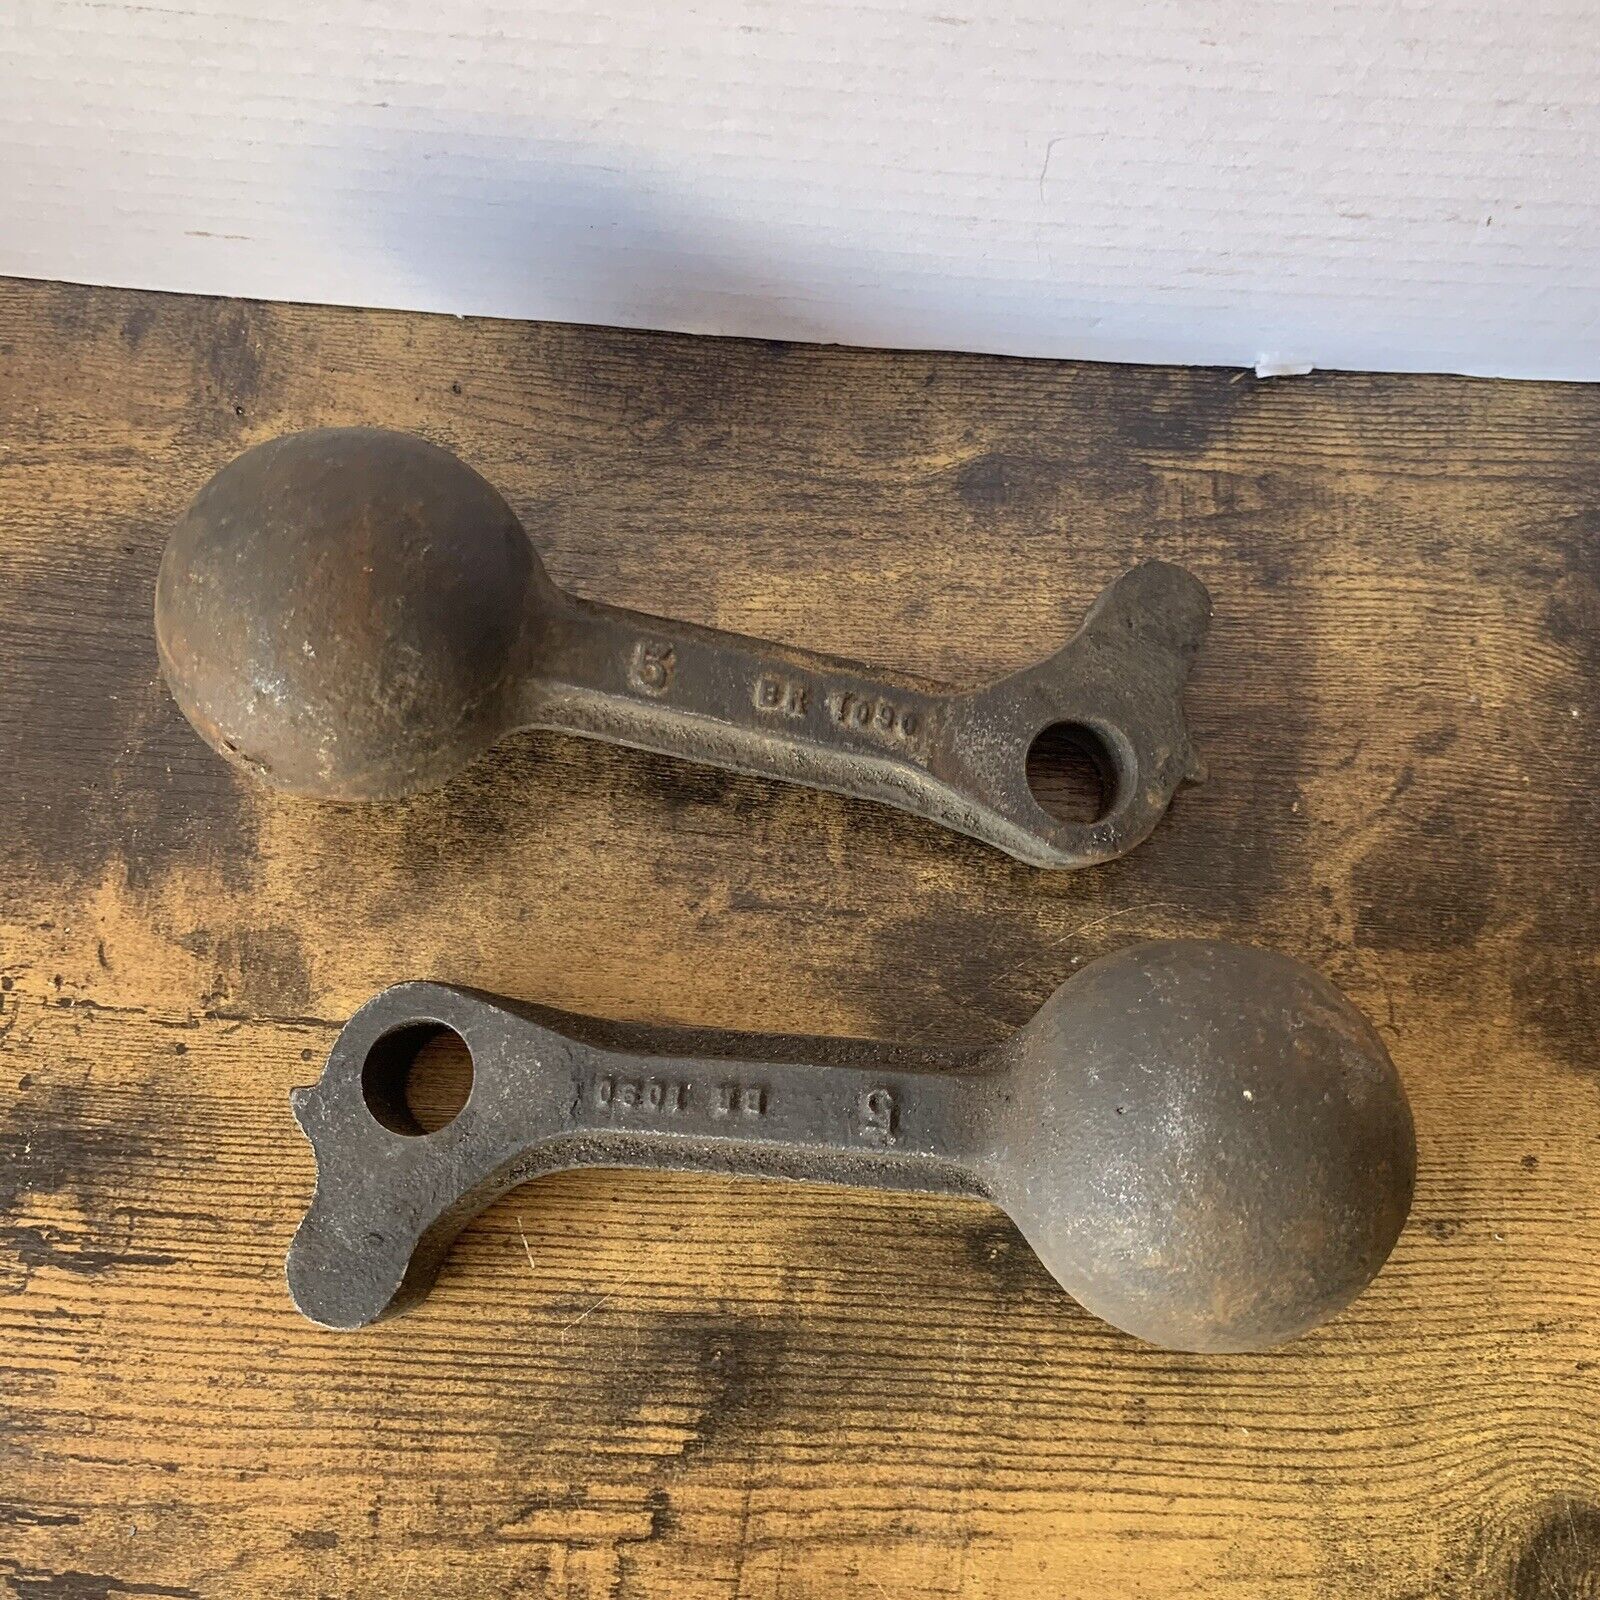 2 Antique PRIME-MILW BR 1090 7” Locomotive Cast Iron Bell Clappers - Very Rare